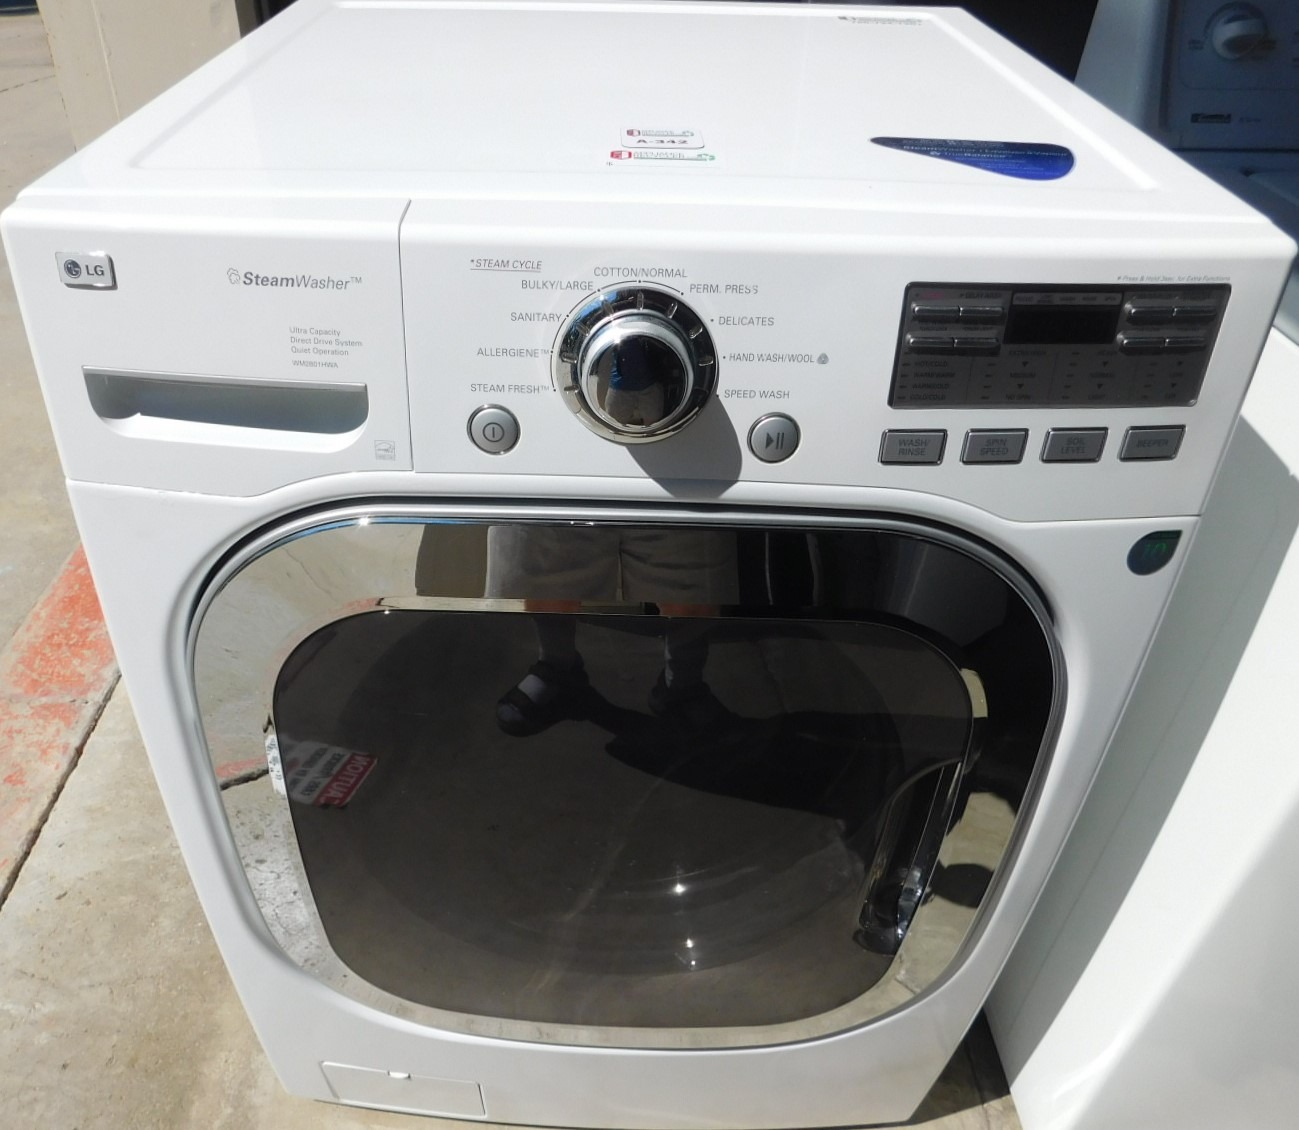 How To Fix The Error Code SE (or 5E) For LG Washing Machine